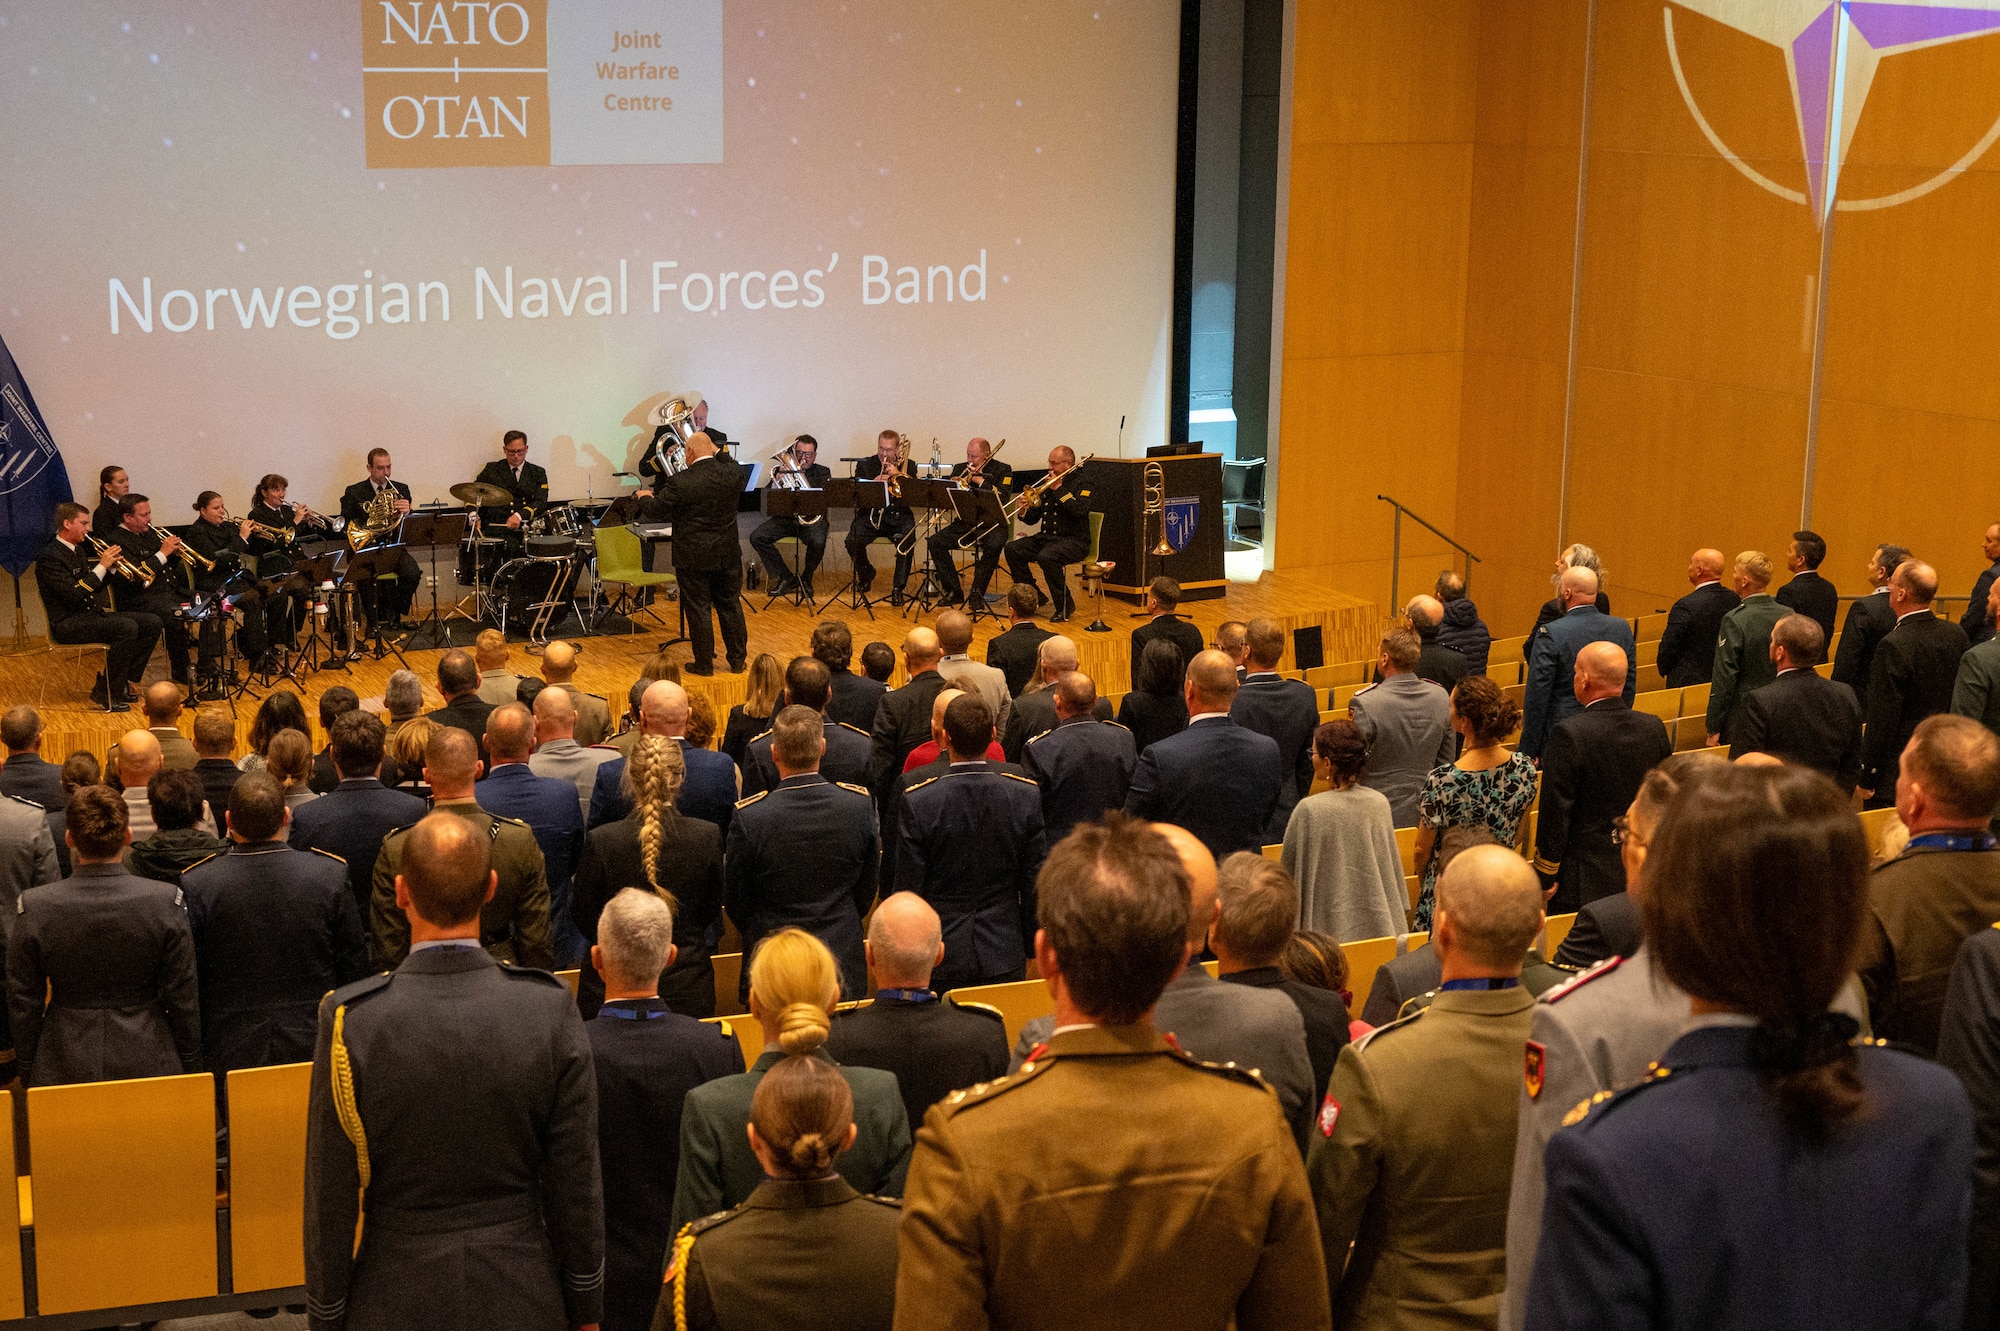 Military and civilian dignitaries stand for the official NATO hymn.